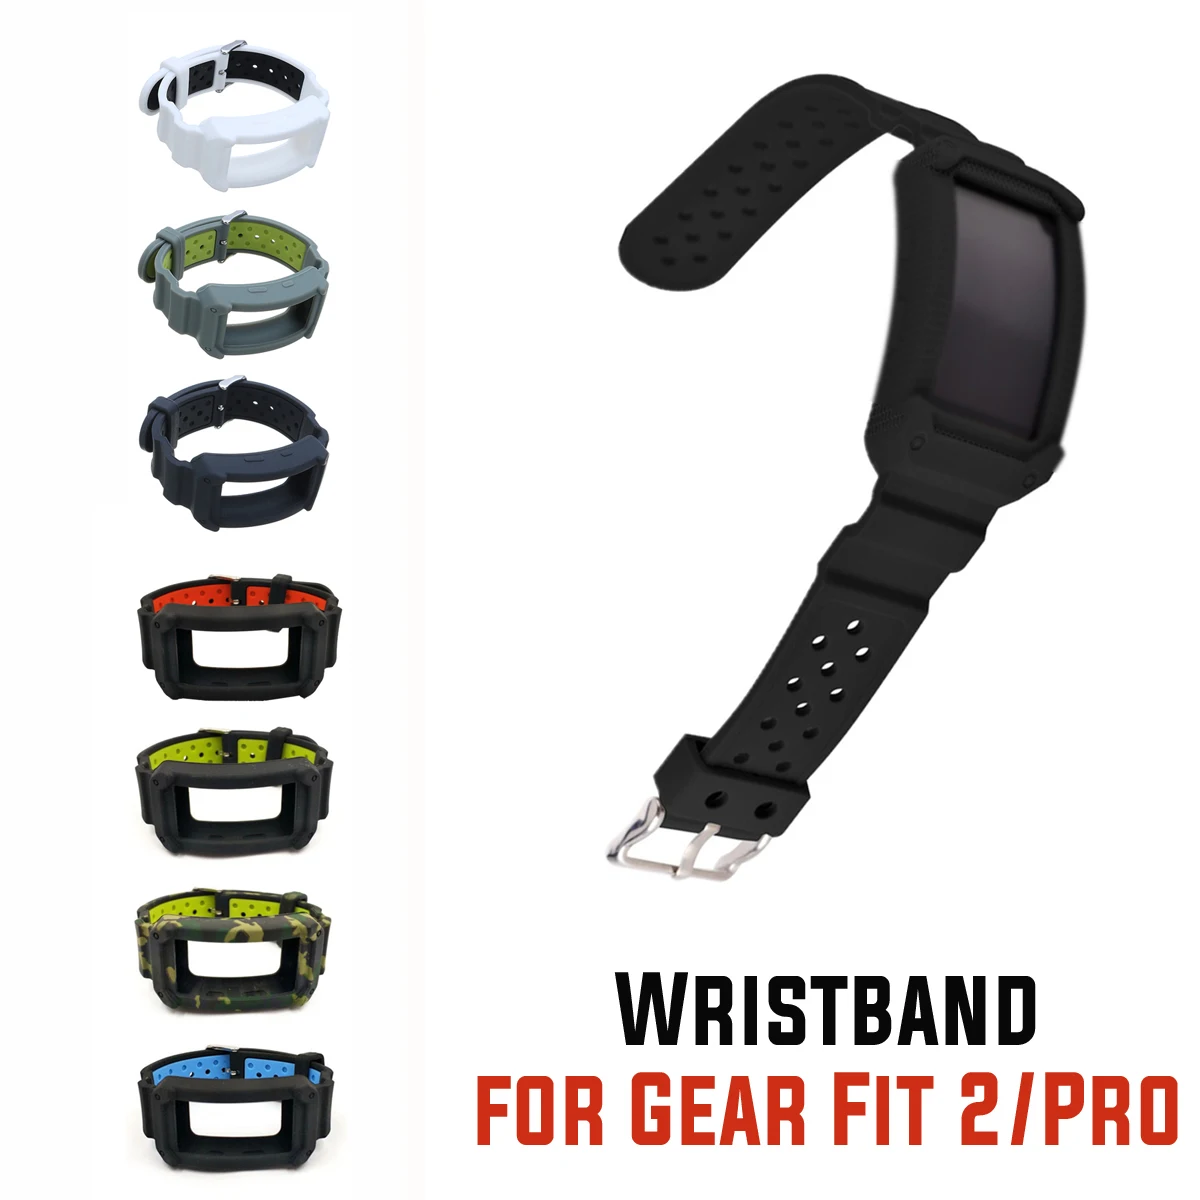 

Silicone Wristband Watch Bands Replacement Strap for Samsung Gear Fit 2 SM-R360/Fit2 Pro R365 Strap Wristband Watch Bands